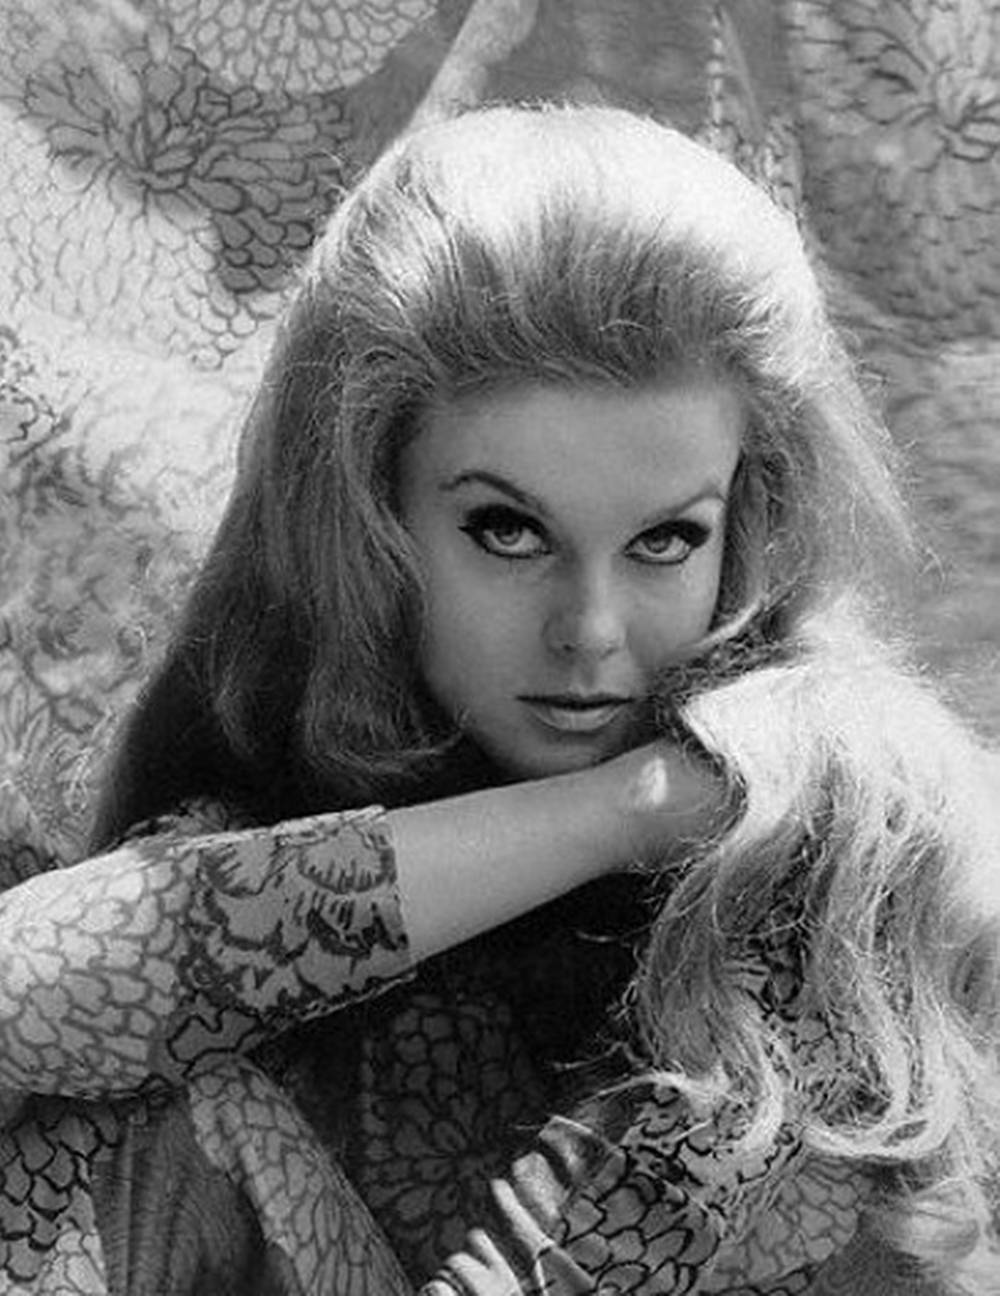 Ann-Margret in her prime during a CBS Television Special, 1968 Wallpaper